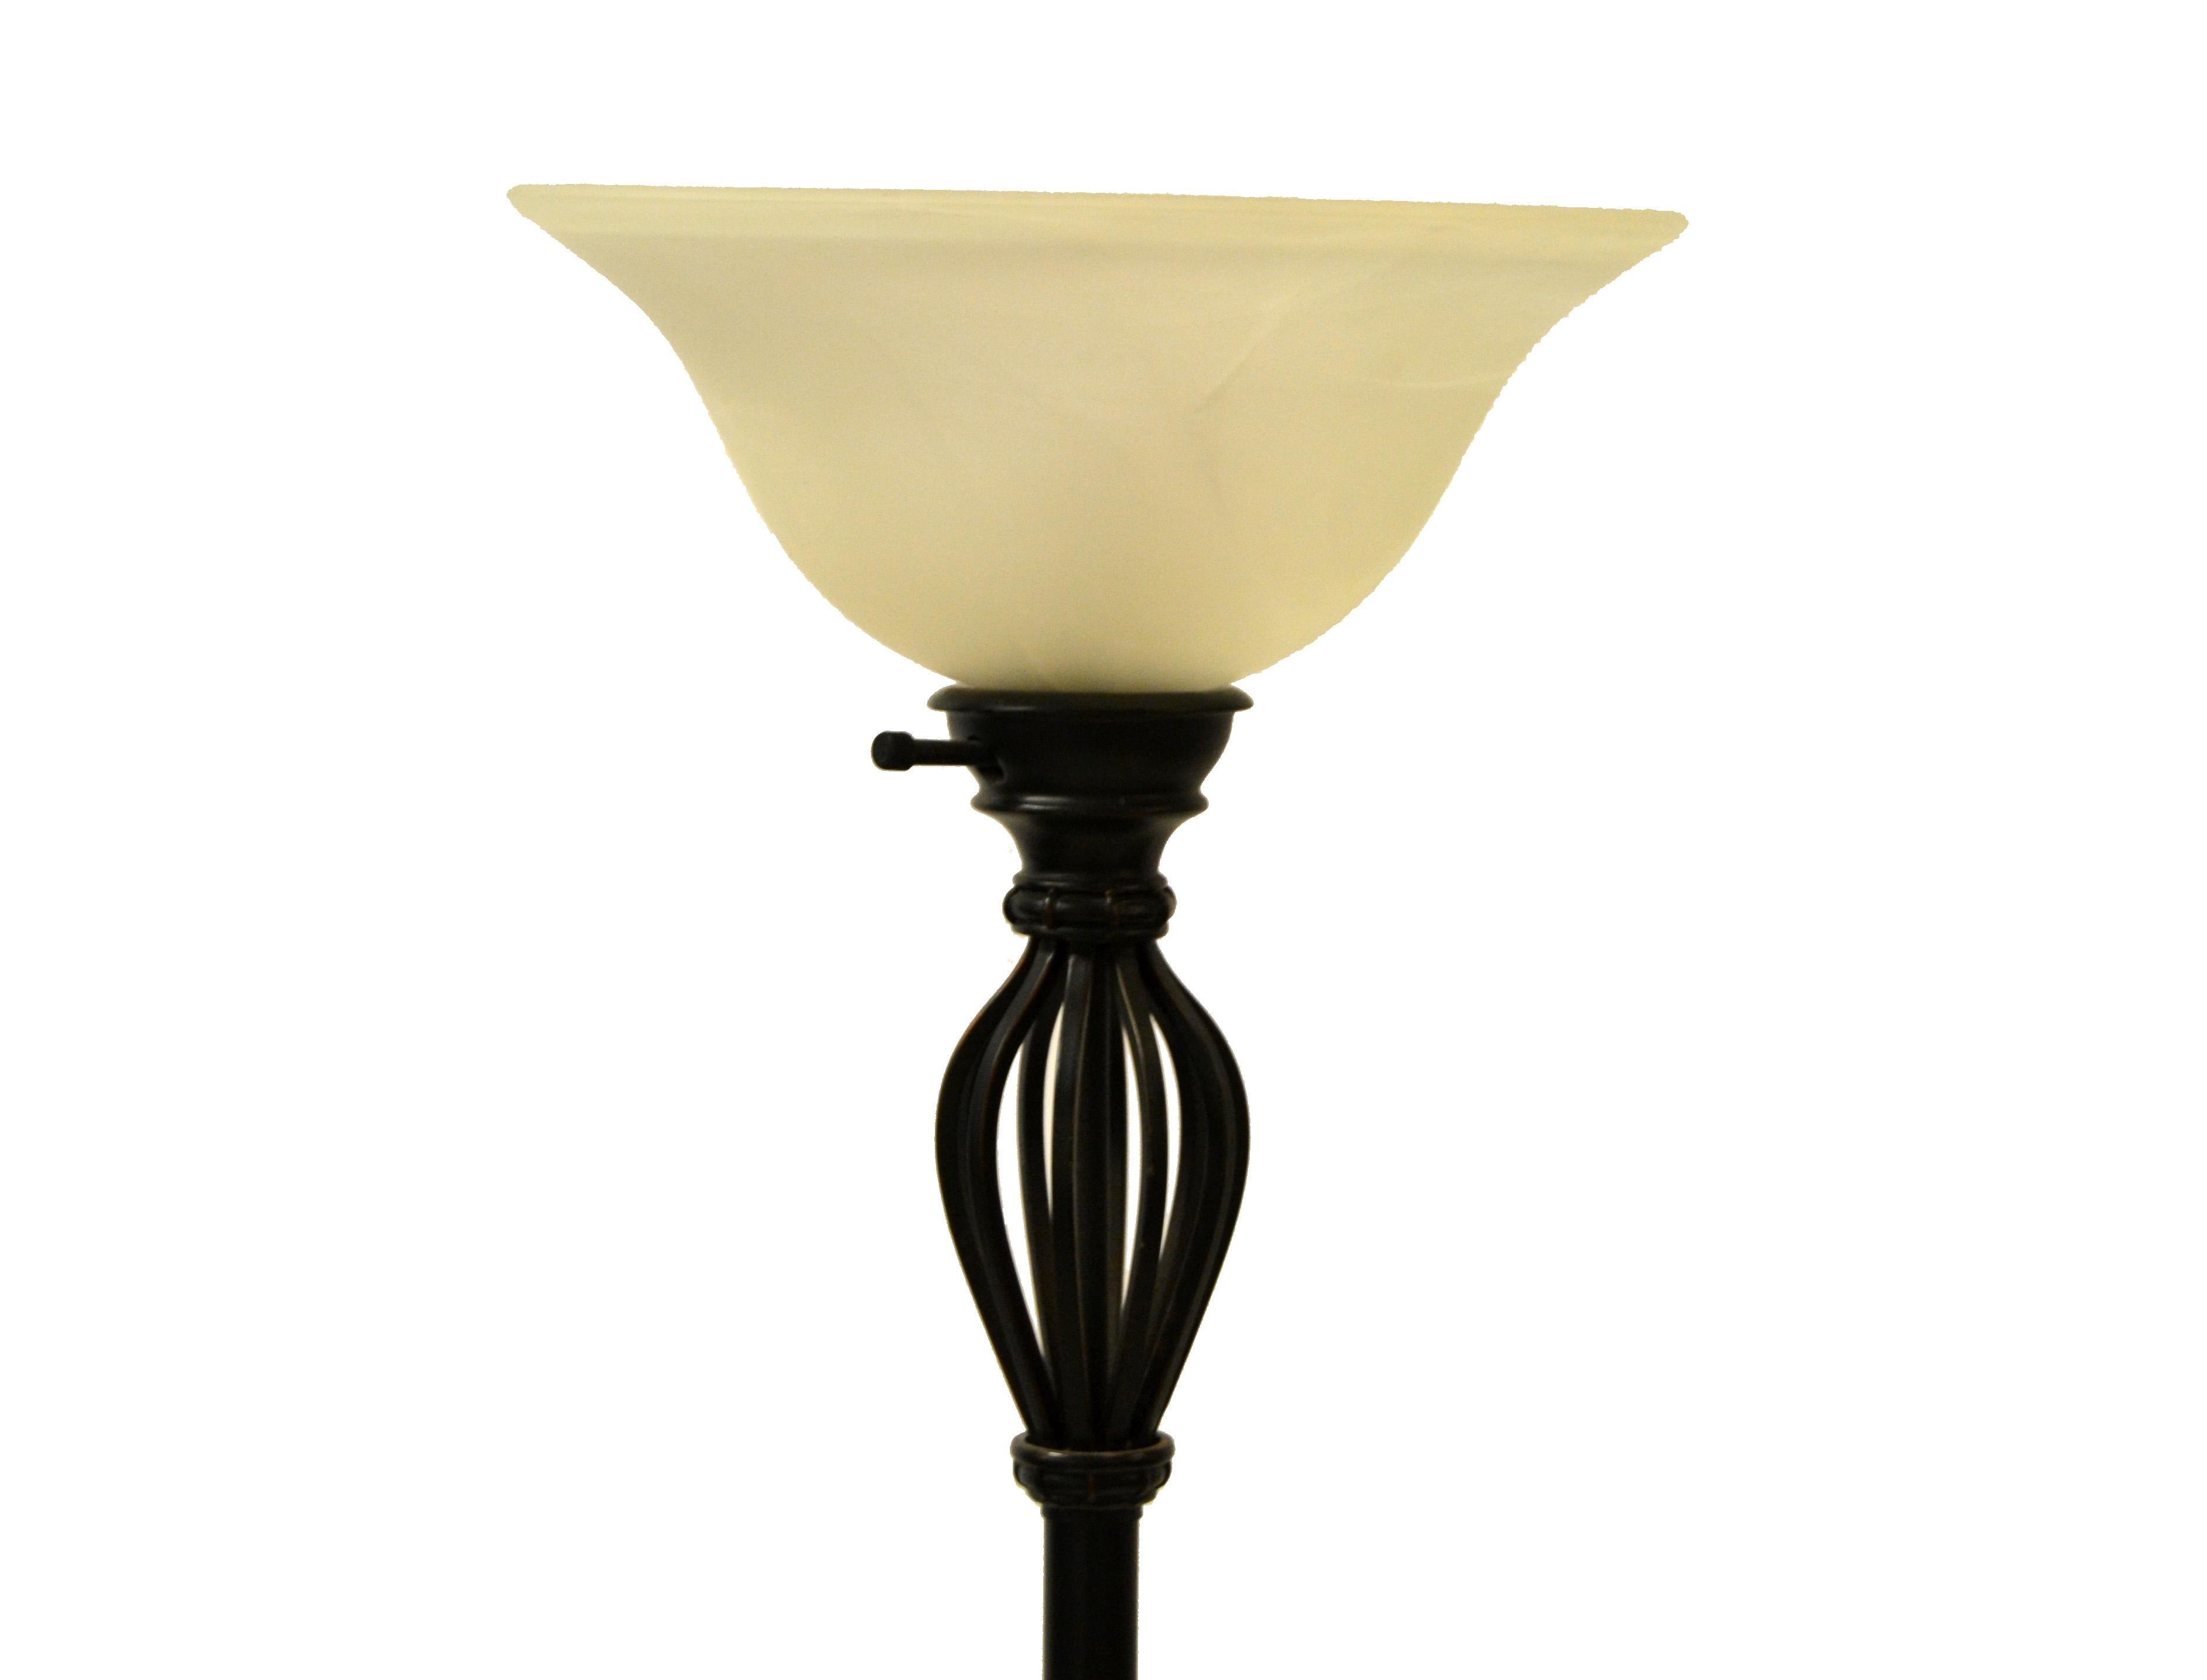 Tall Murano glass and wrought iron floor lamp in bronze color finish on a round base.
In perfect working condition and uses one light bulb with max 75 watts.
We use LED bulbs to protect the beauty of the blown Murano glass globe.
 